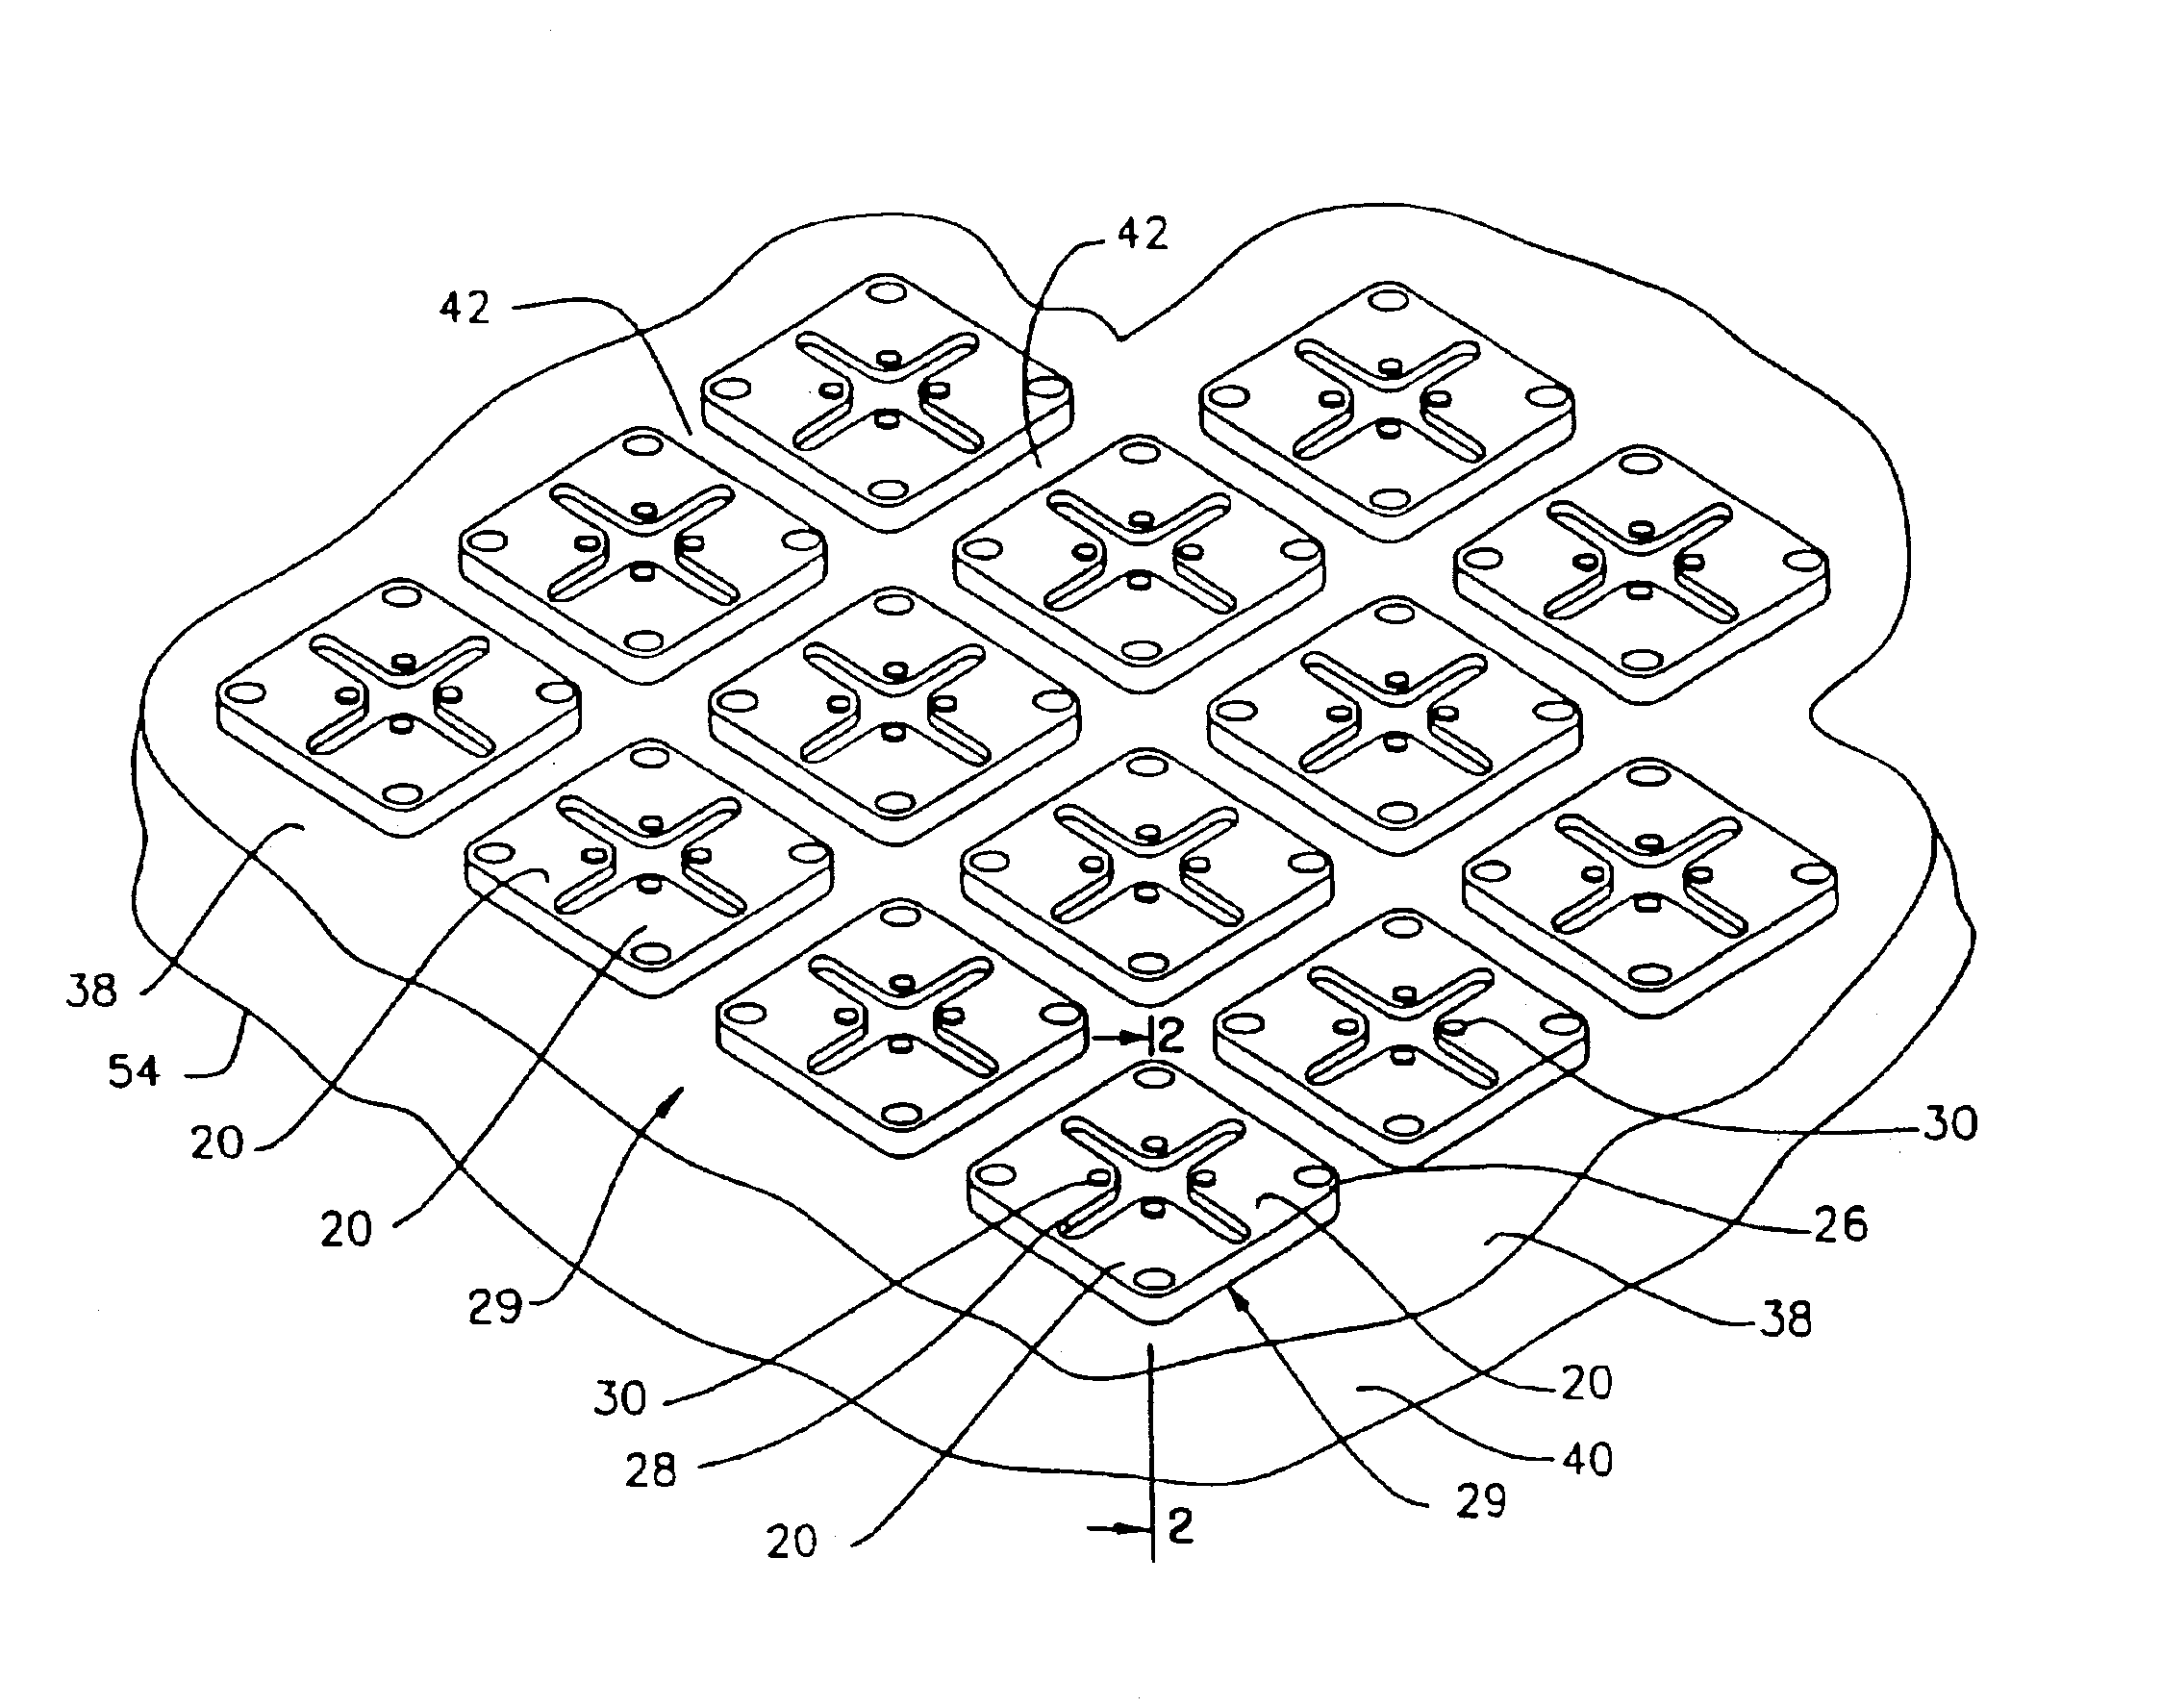 Method of making an electronic contact